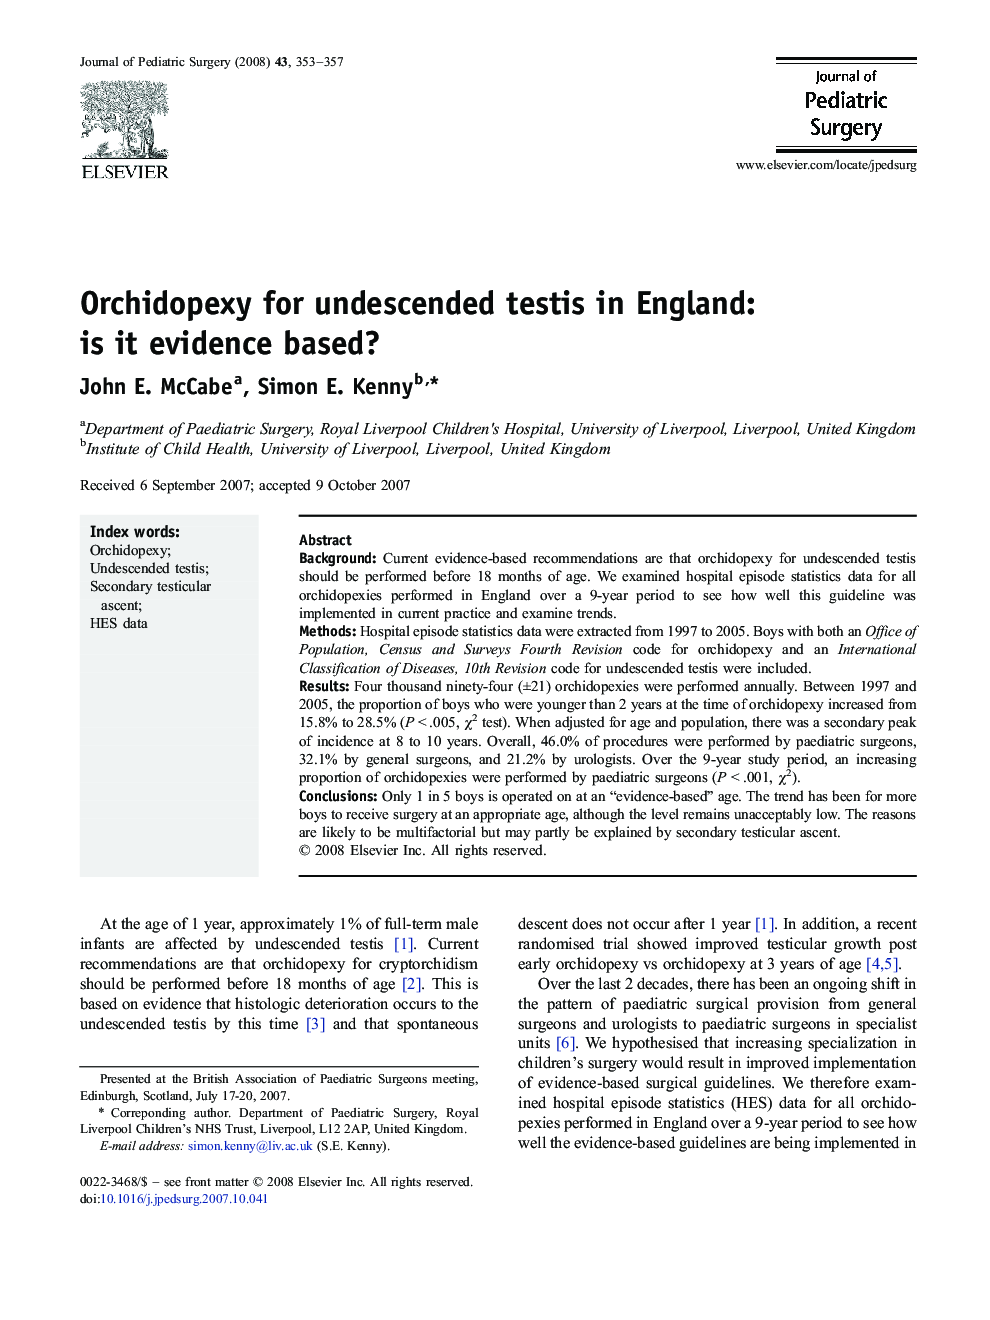 Orchidopexy for undescended testis in England: is it evidence based? 